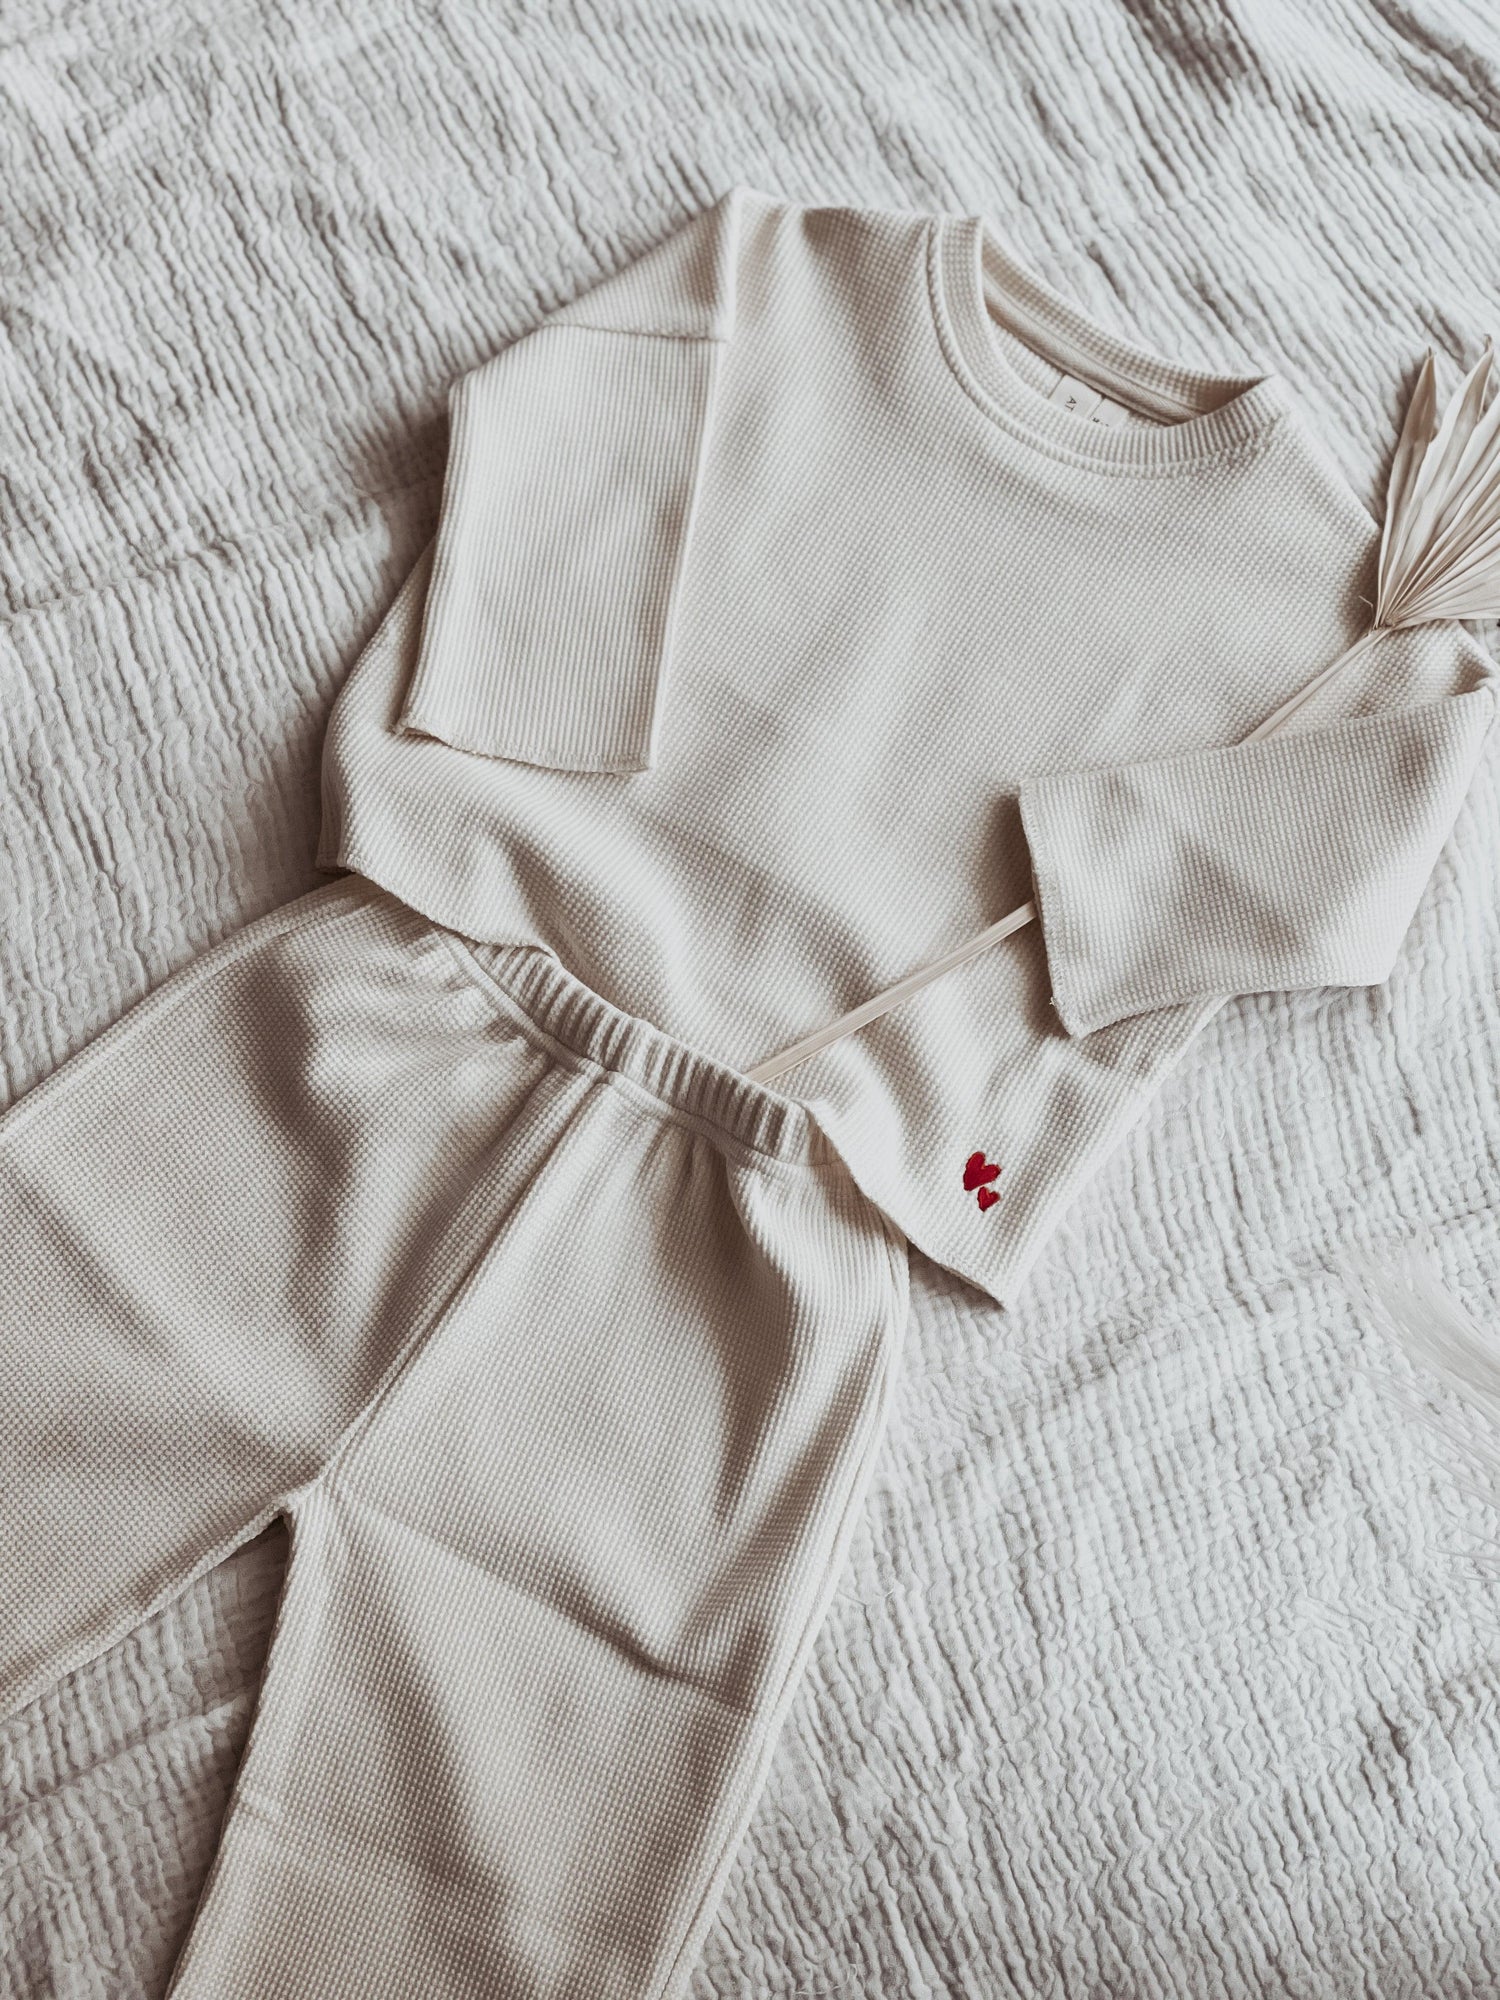 Matching Sweater Mini - The Little One • Family.Concept.Store. 